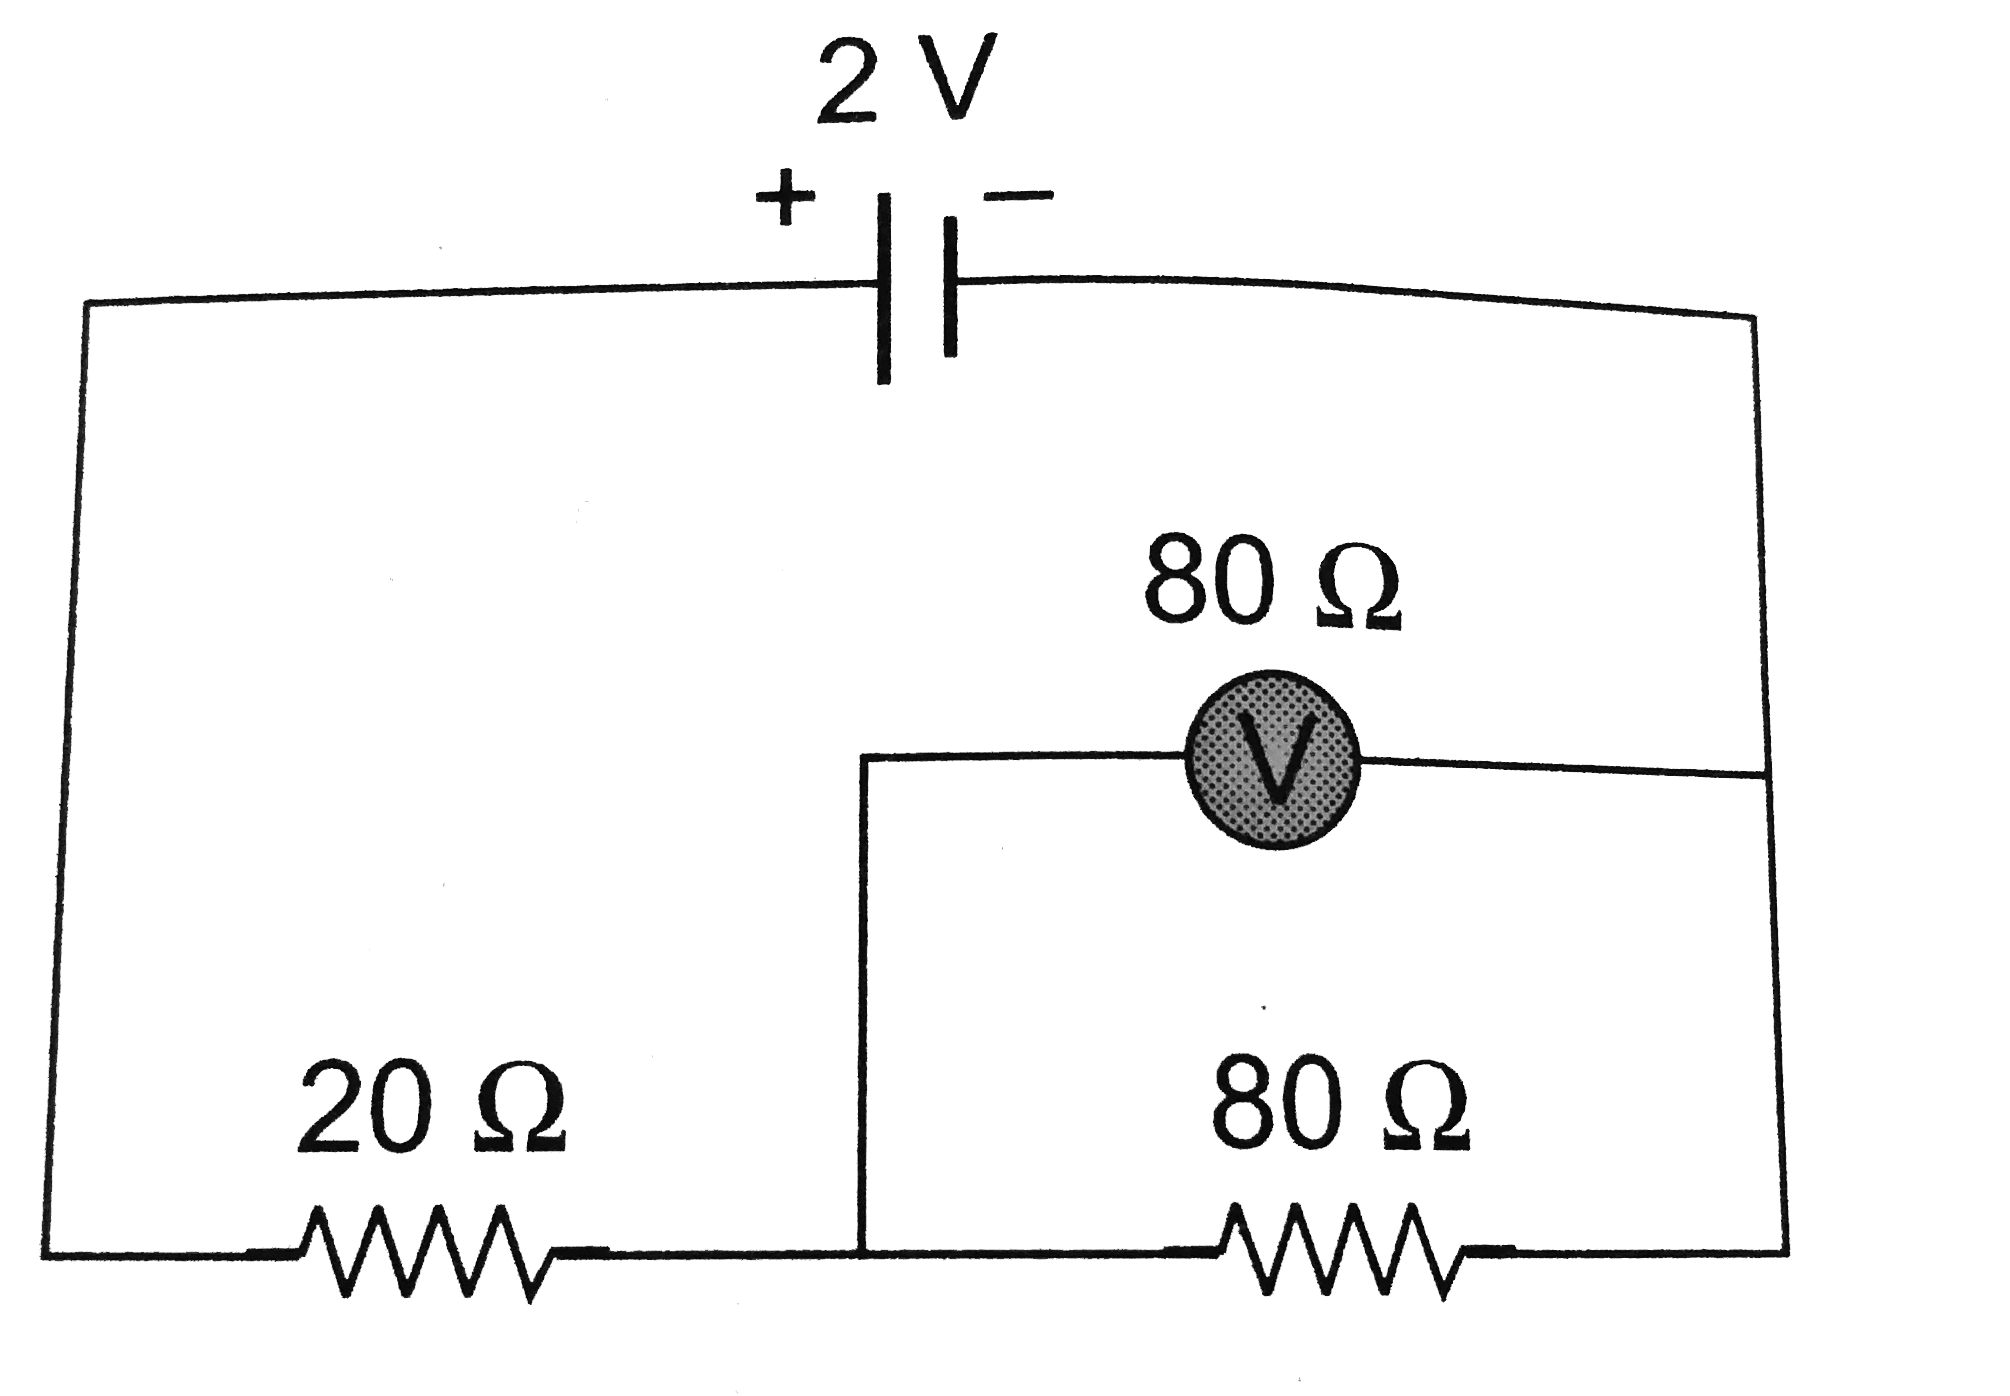 In the adjoining circuit, the e.m.f. of the cell is 2 volt and the internal resistance is negligible. The resistance of the voltmeter is 80 ohm. The reading of the voltmeter will be